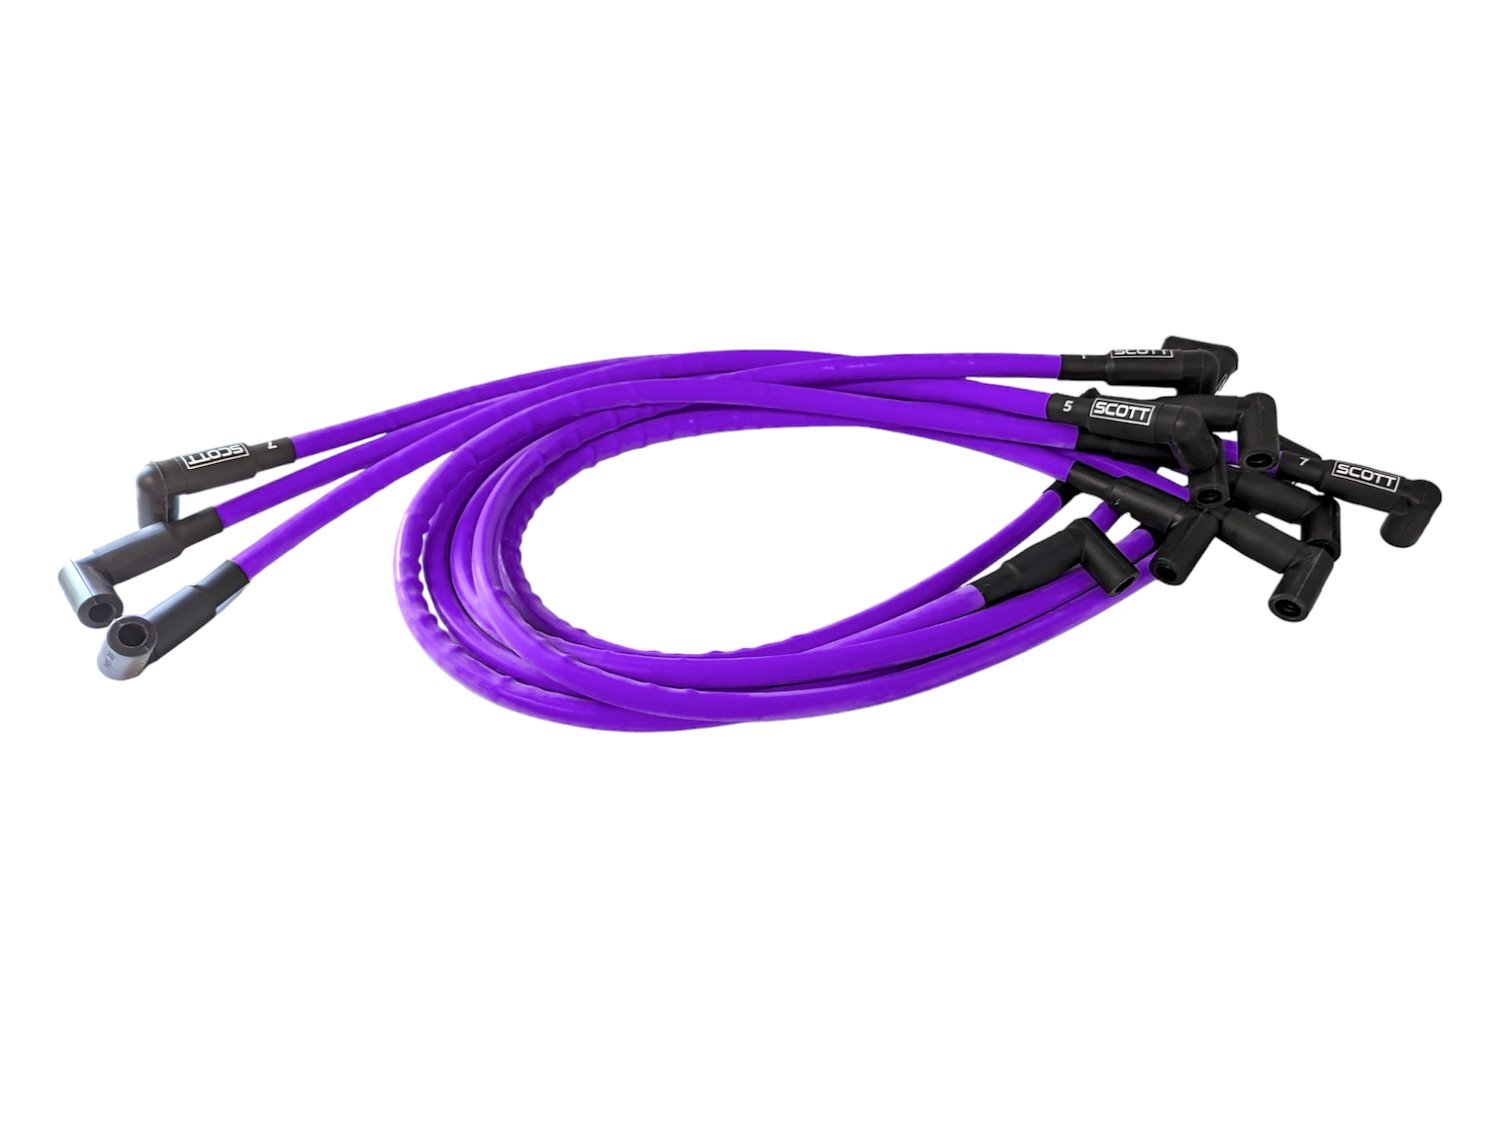 SPW300-CH-516-6 Super Mag Fiberglass-Oversleeved Spark Plug Wire Set for Big Block Chevy Dragster, Under Header [Purple]